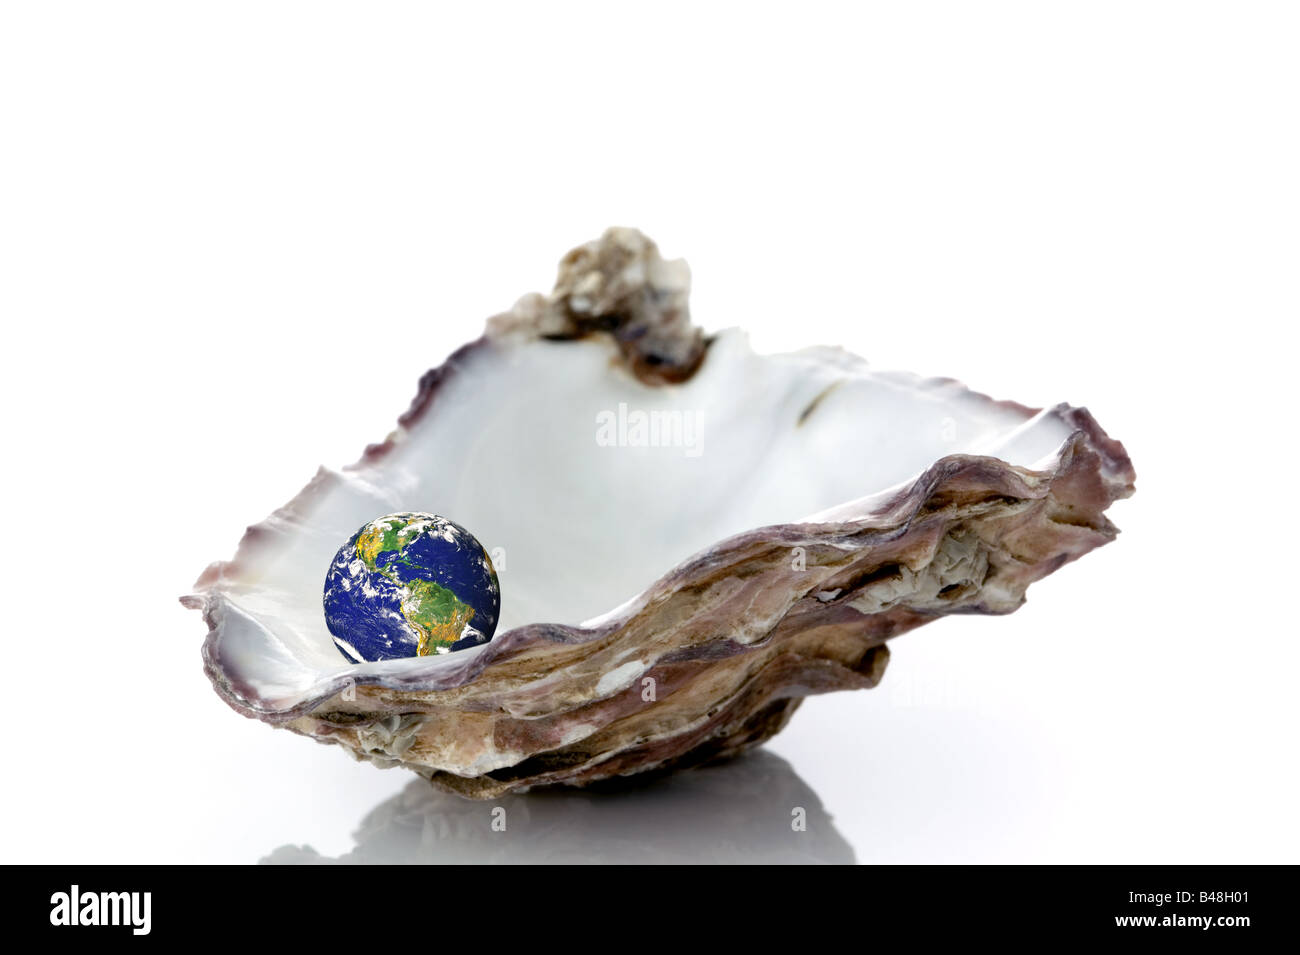 Concept image for the phrase The world is your oyster Stock Photo